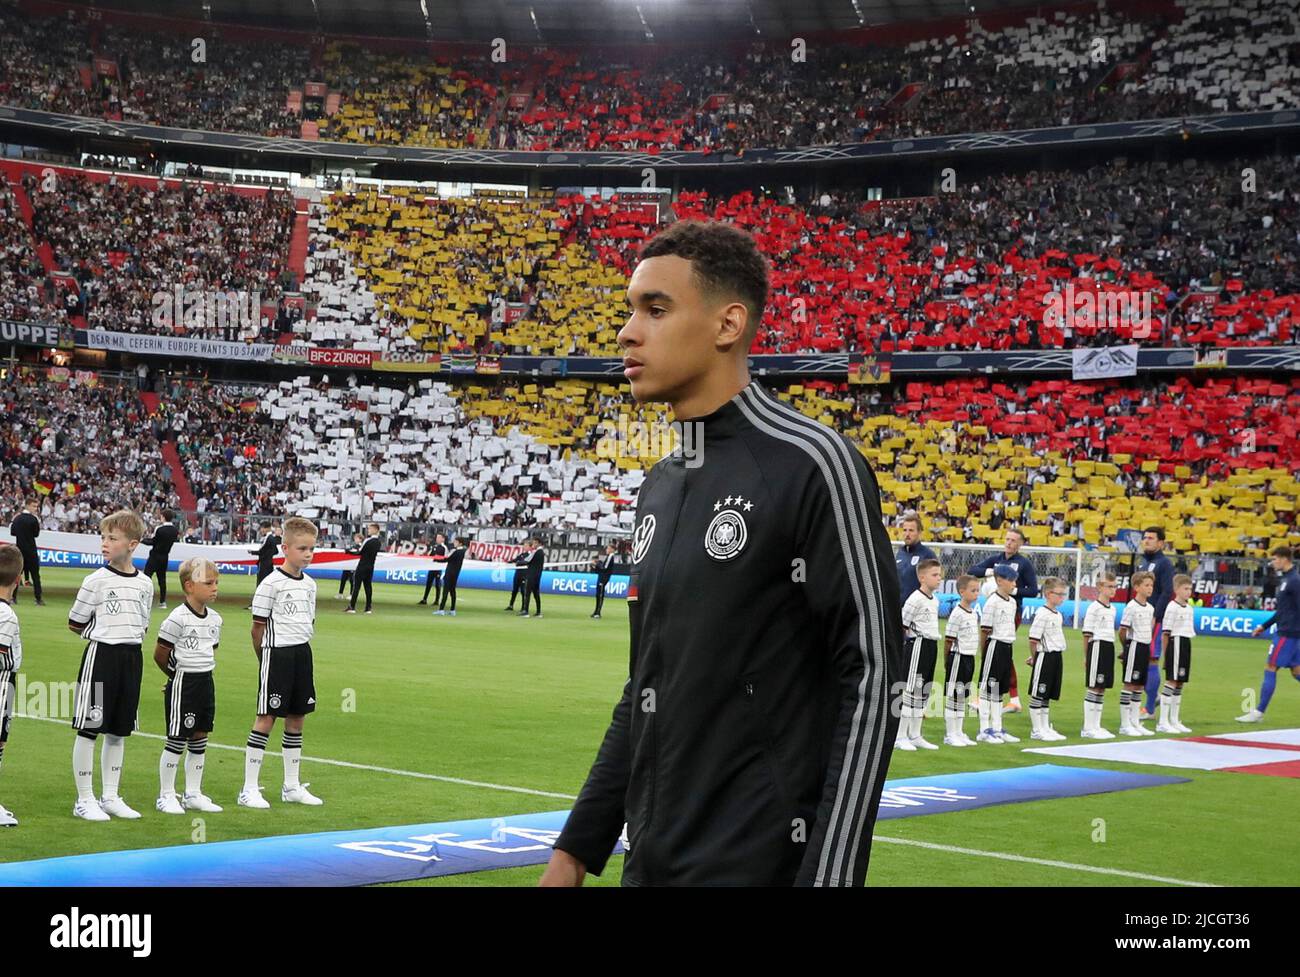 Jamal Musiala of Germany  MUNICH, GERMANY - JUNE 07:  UEFA Nations League League A Group 3 match between Germany and England at Allianz Arena on June 07, 2022 in Munich, Germany. Nations League Deutschland England  © diebilderwelt / Alamy Stock Stock Photo